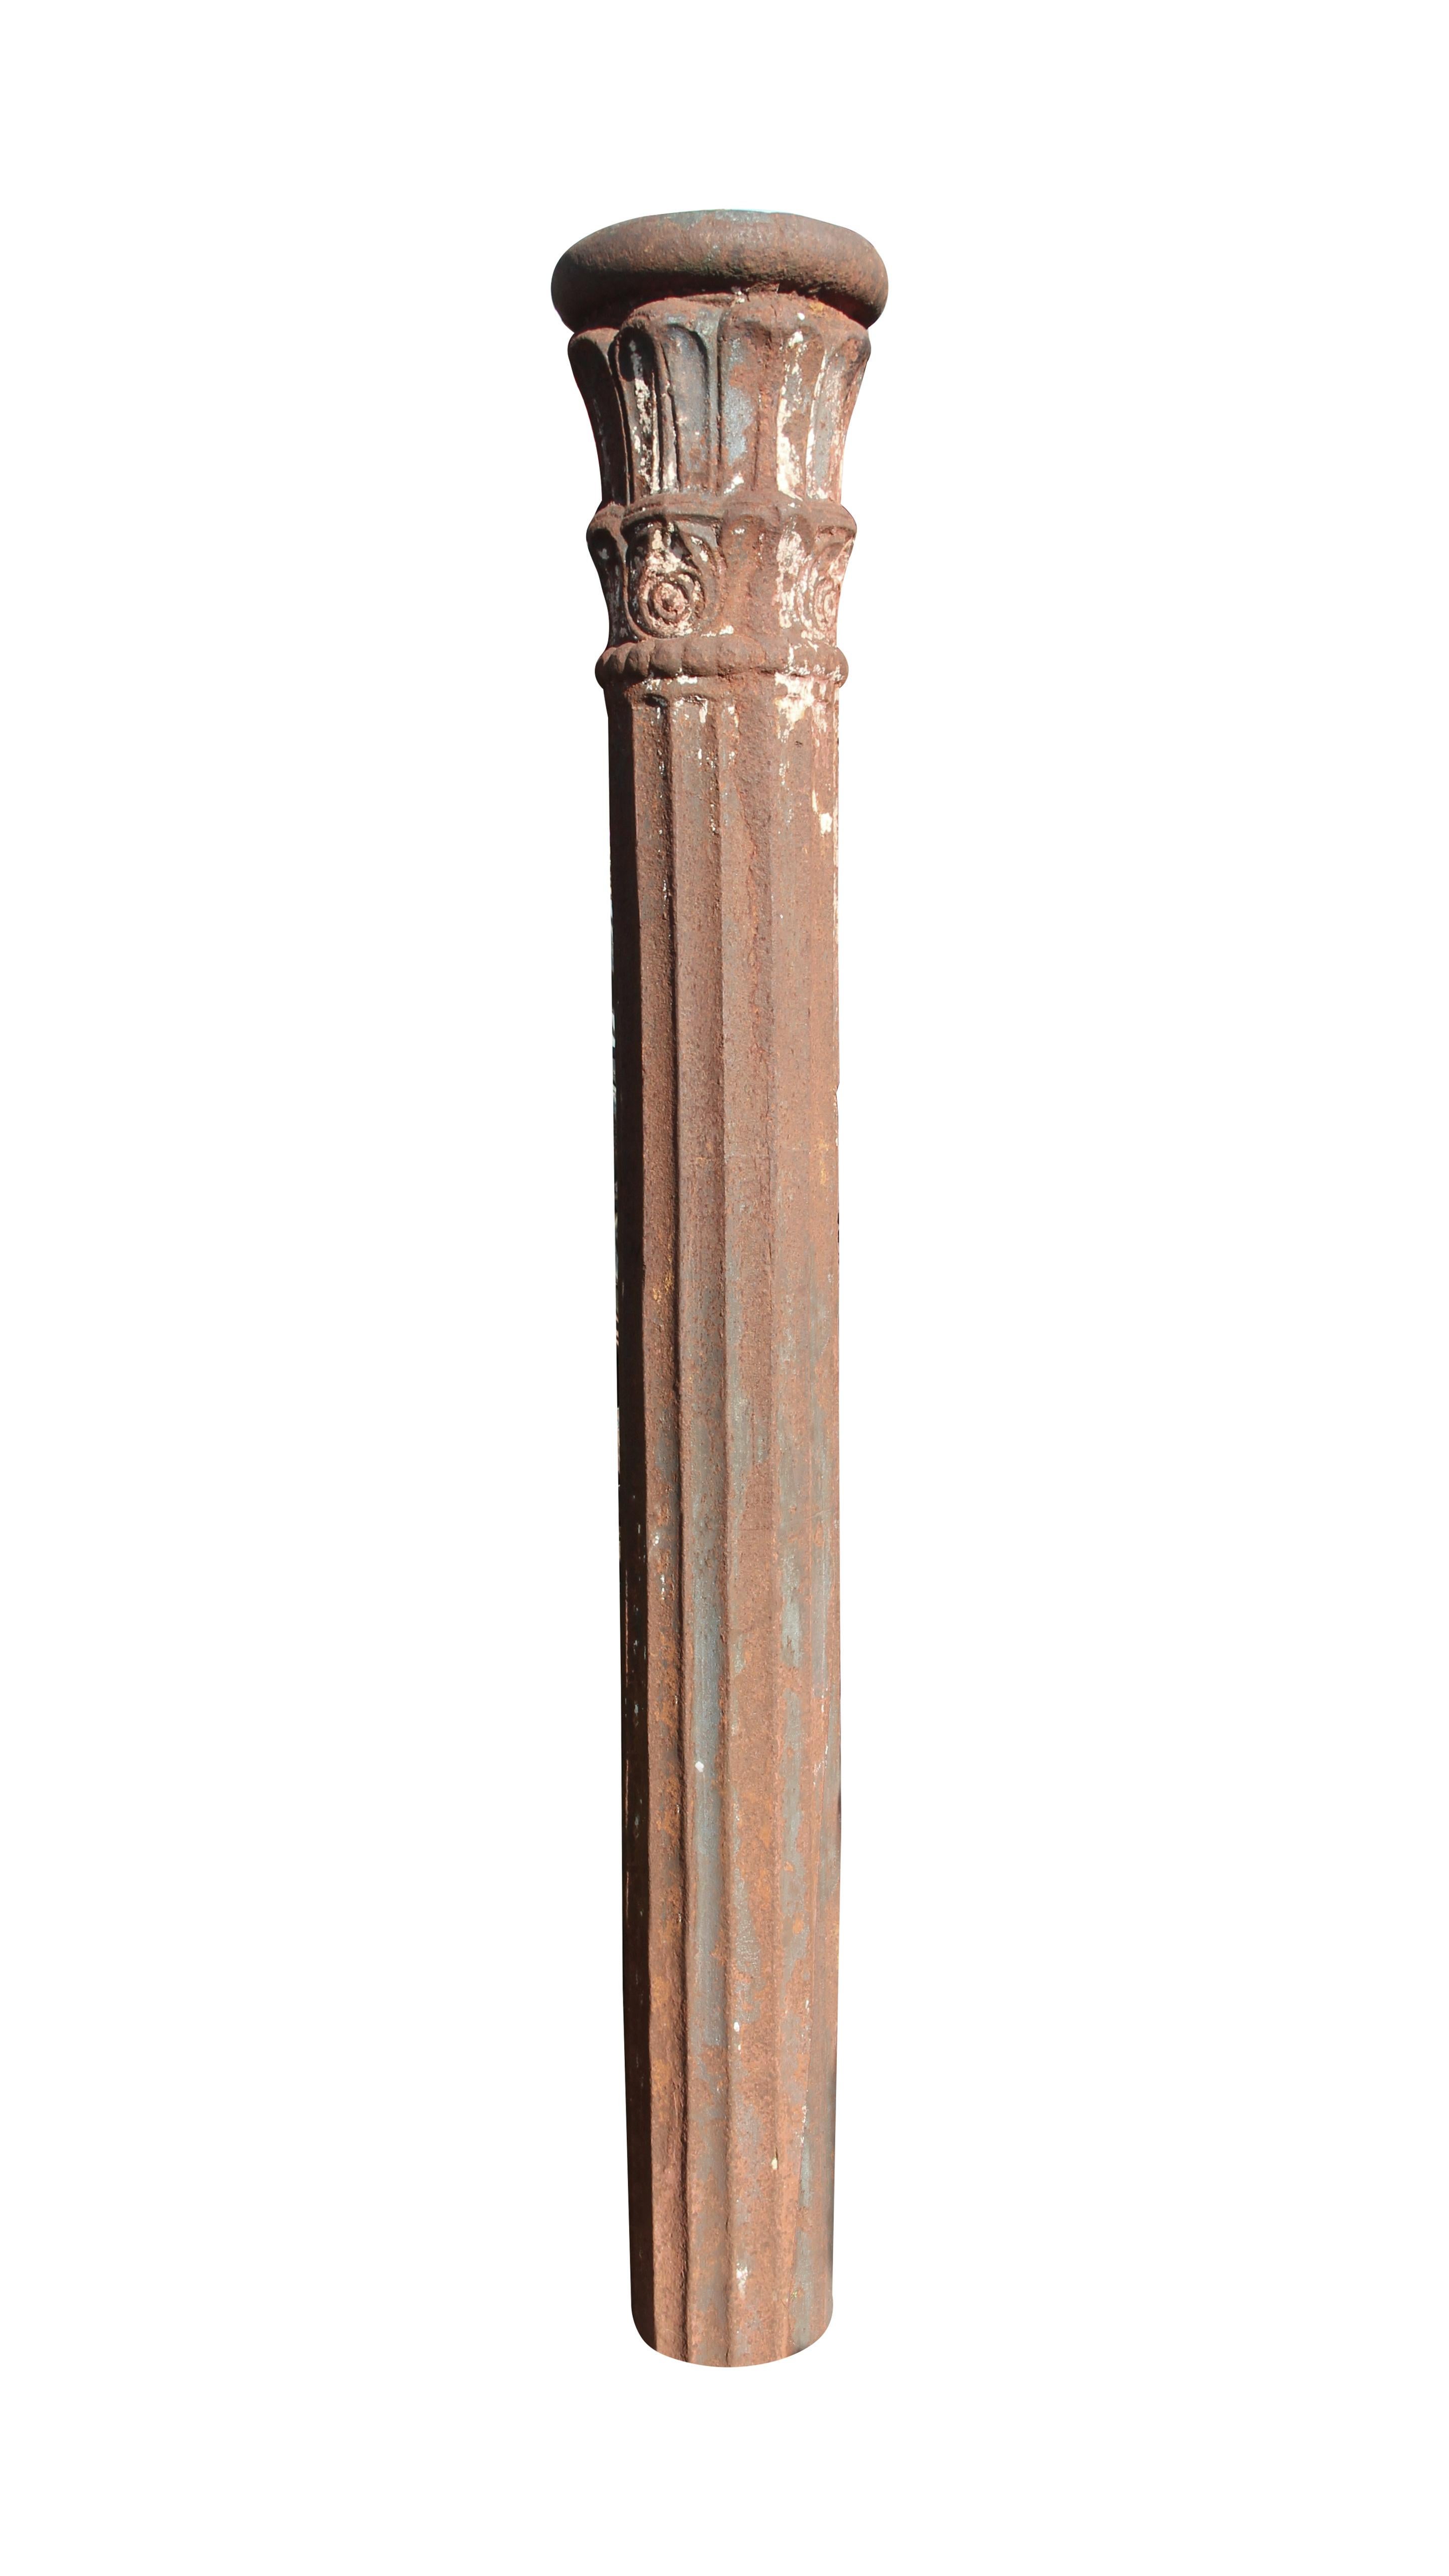 Thick cast iron column with a fluted body and decorative capital. The bottom is uneven and 6 inches will need to be cut off to make it even thus shorting its height. Please note, this item is located in our Scranton, PA location. 72 in. H x 7 in.